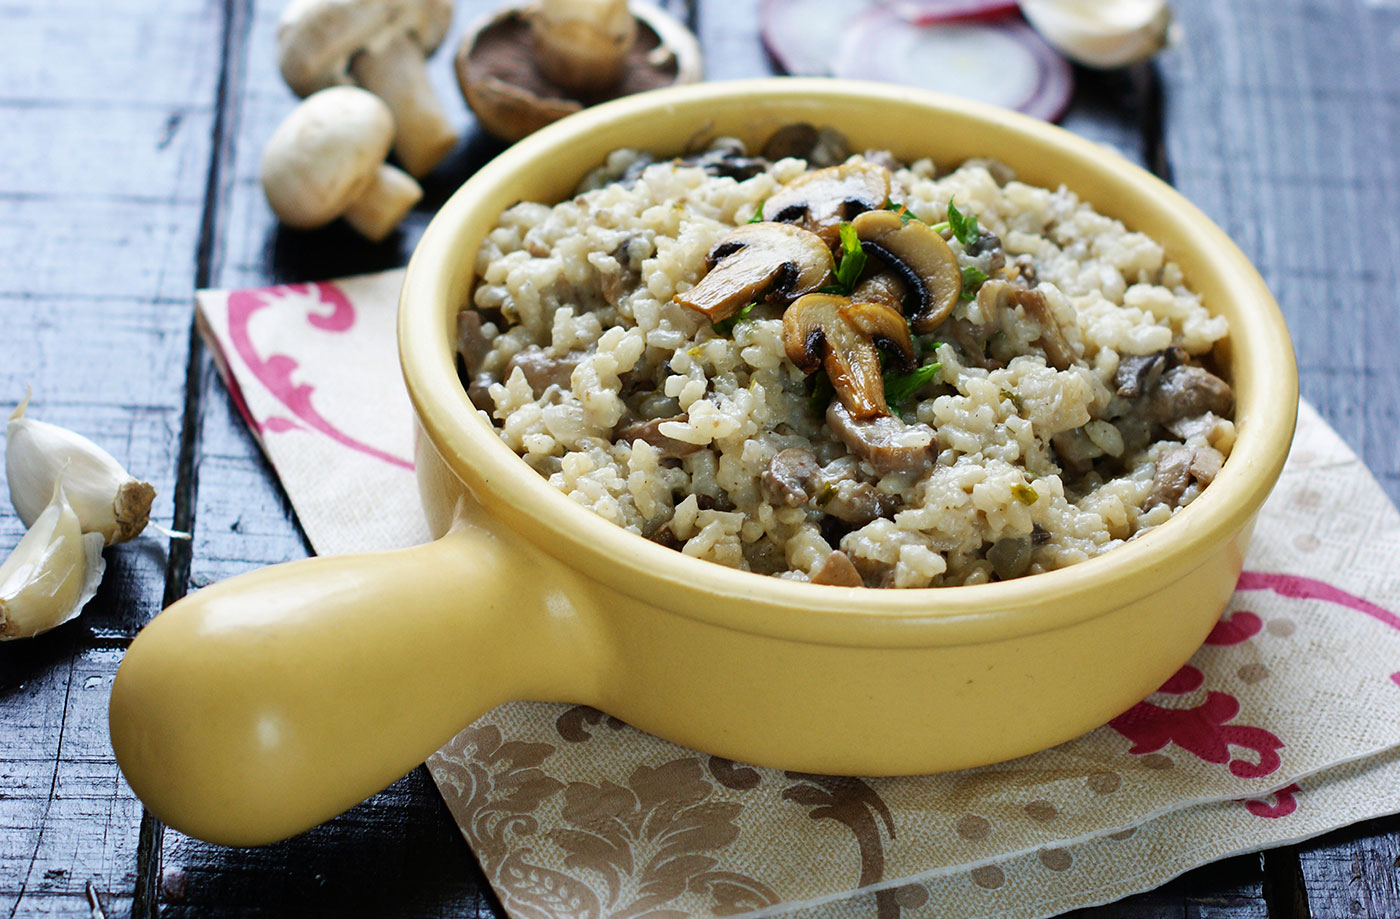 Eat Some Italian Food and We’ll Tell You Which Mediterranean City to Visit Risotto